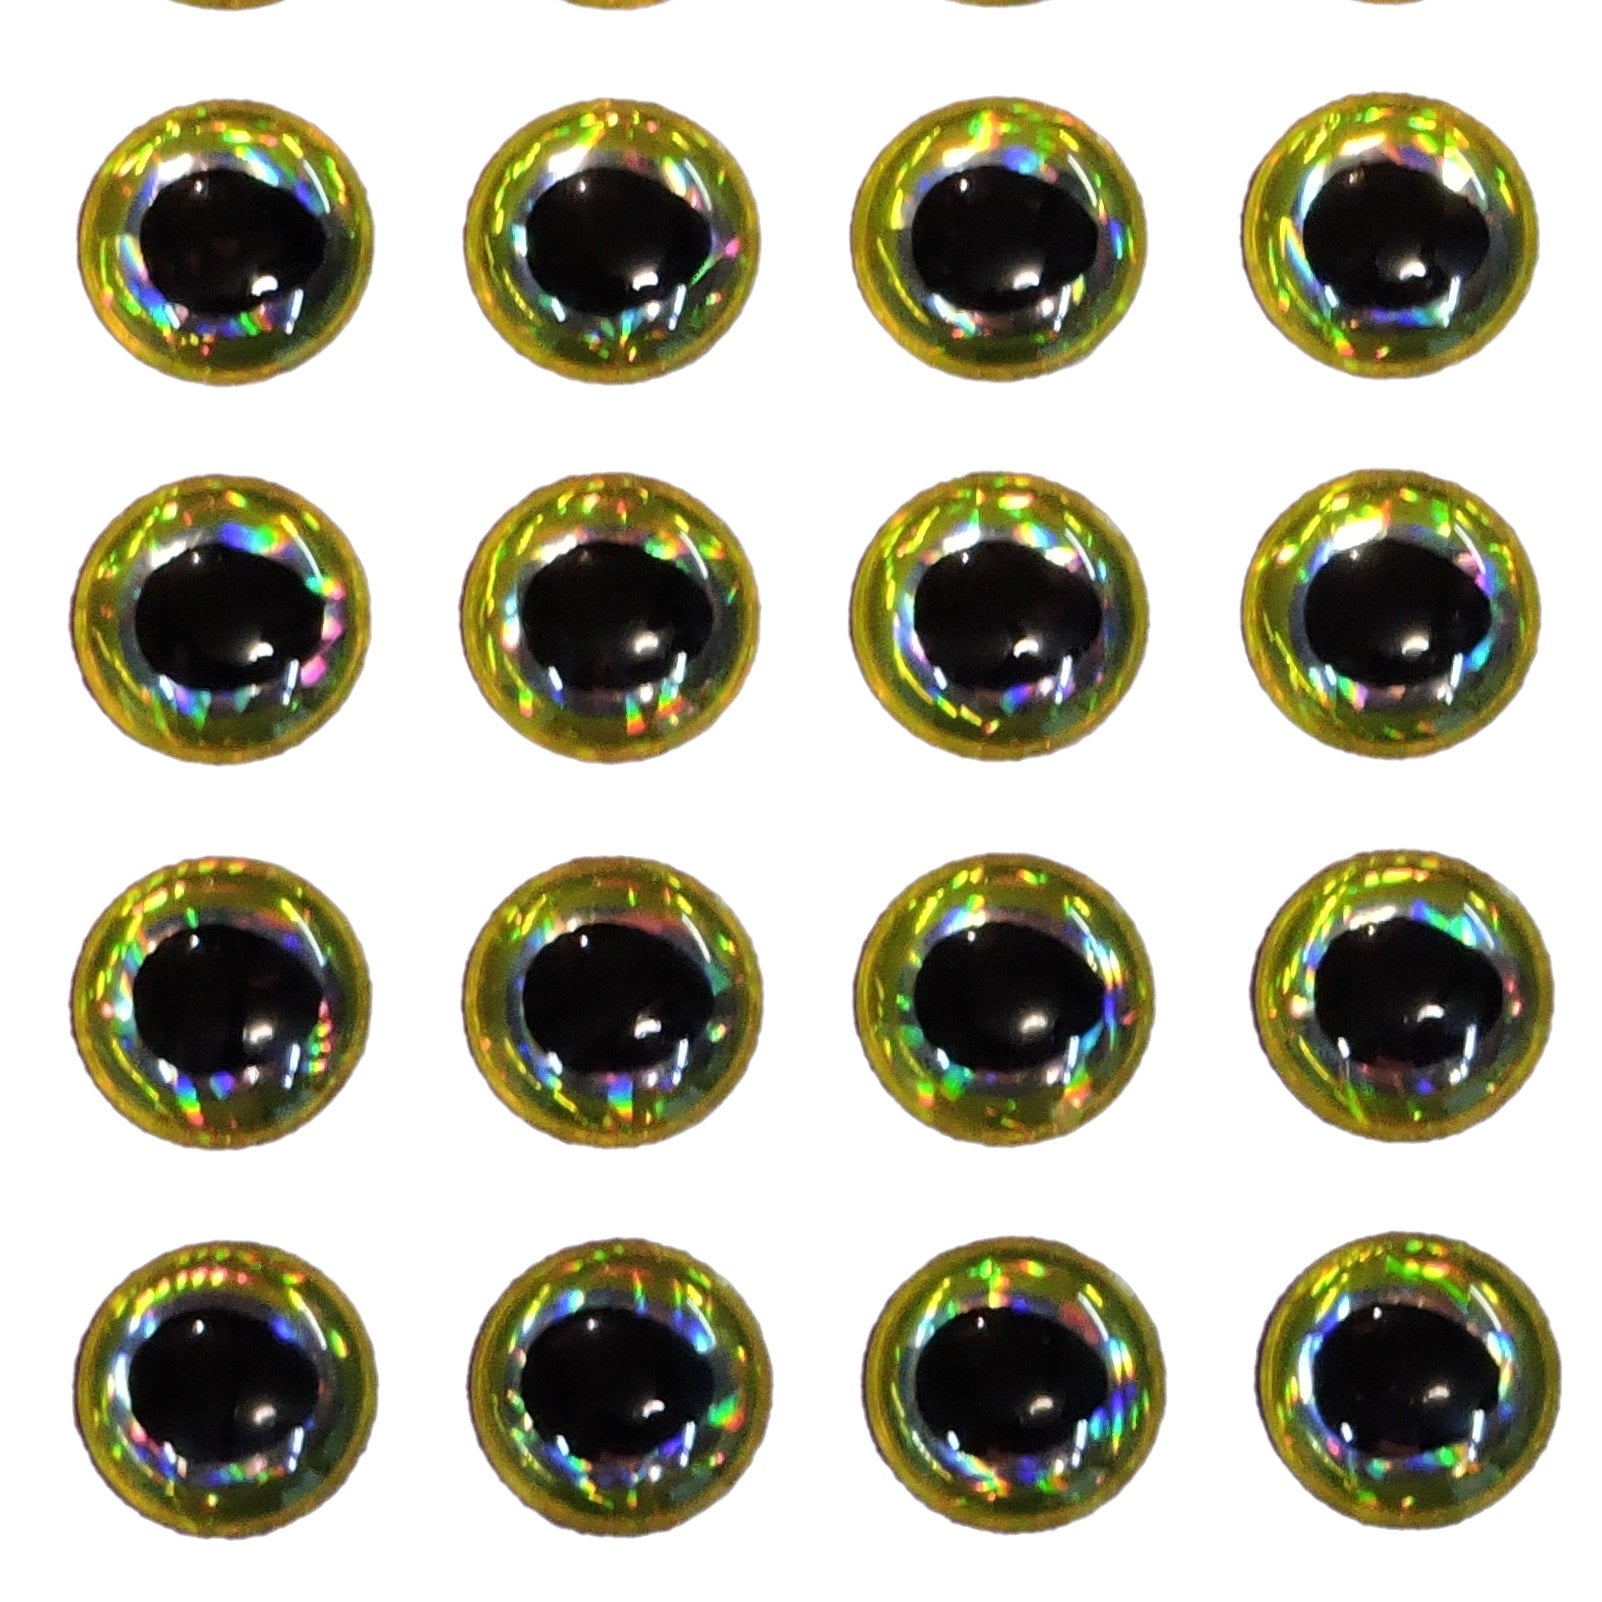 7mm (9/32) - 3D Holographic Eyes for Fly Tying and Lure Making